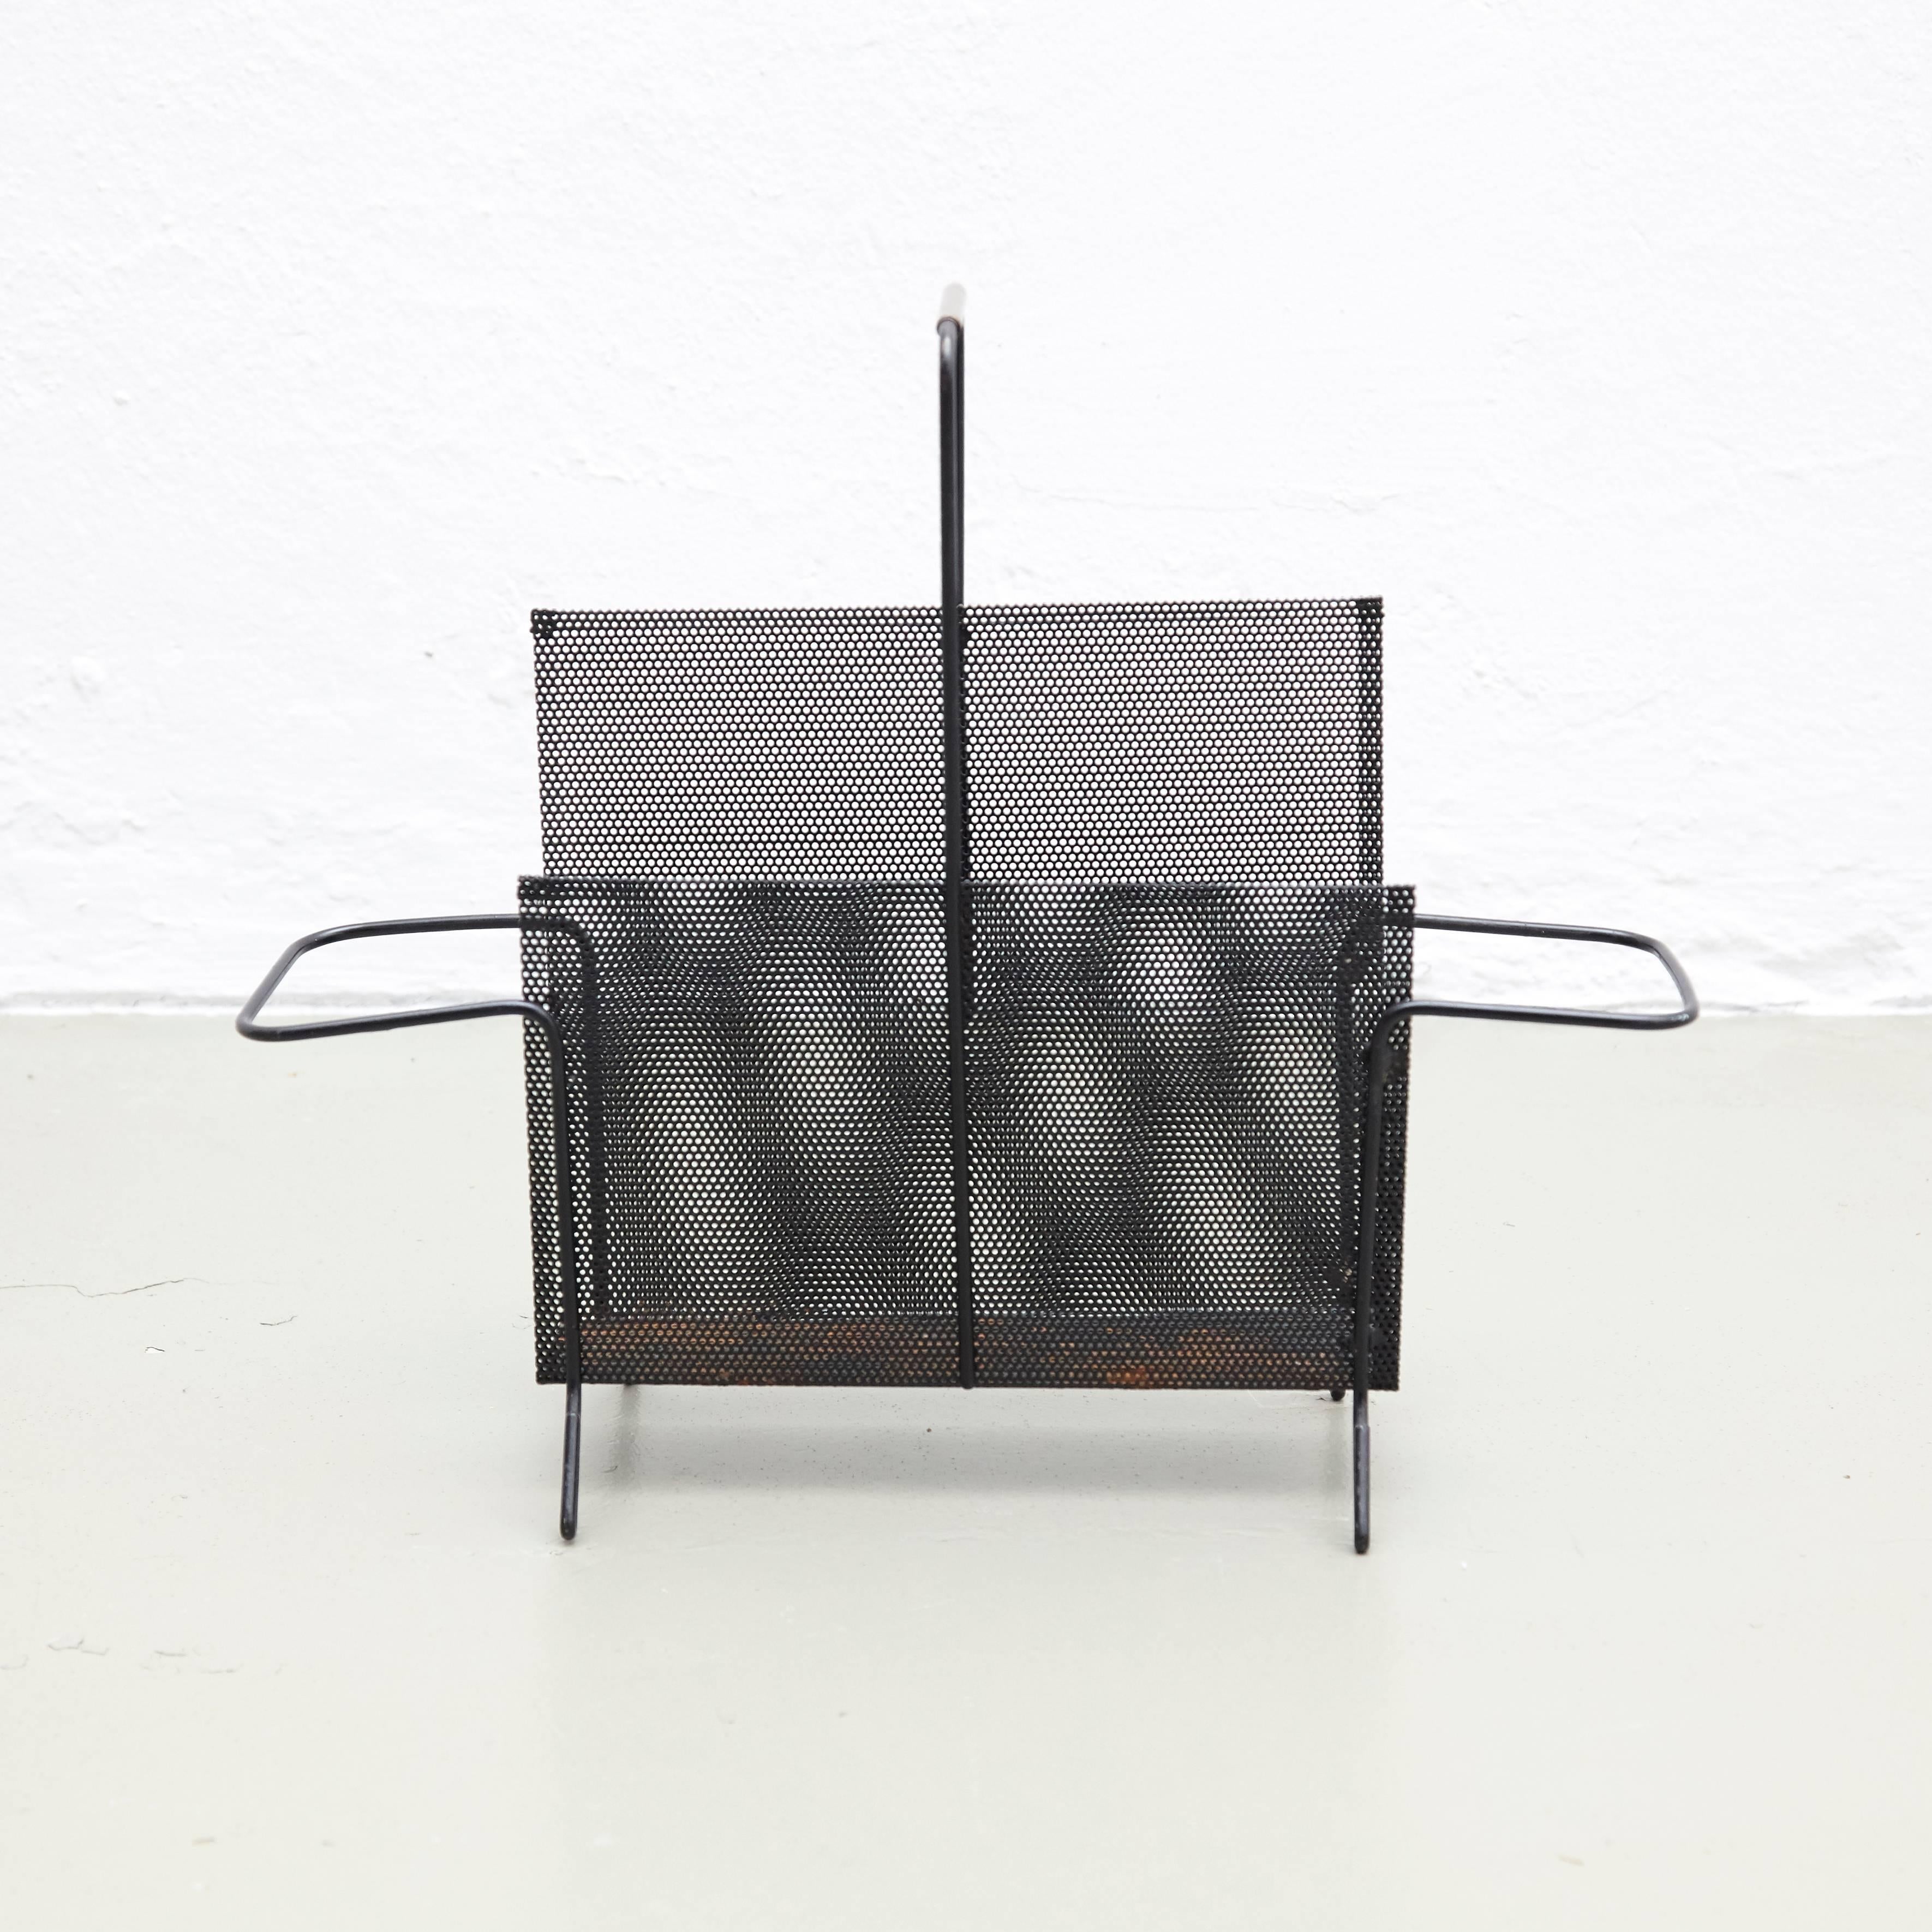 Magazine holder, designed by Mathieu Mategot.
Manufactured by ateliers Mategot (France), circa 1950.
Folded, perforated metal.

In good original condition, with minor wear consistent with age and use, preserving a beautiful patina. With some